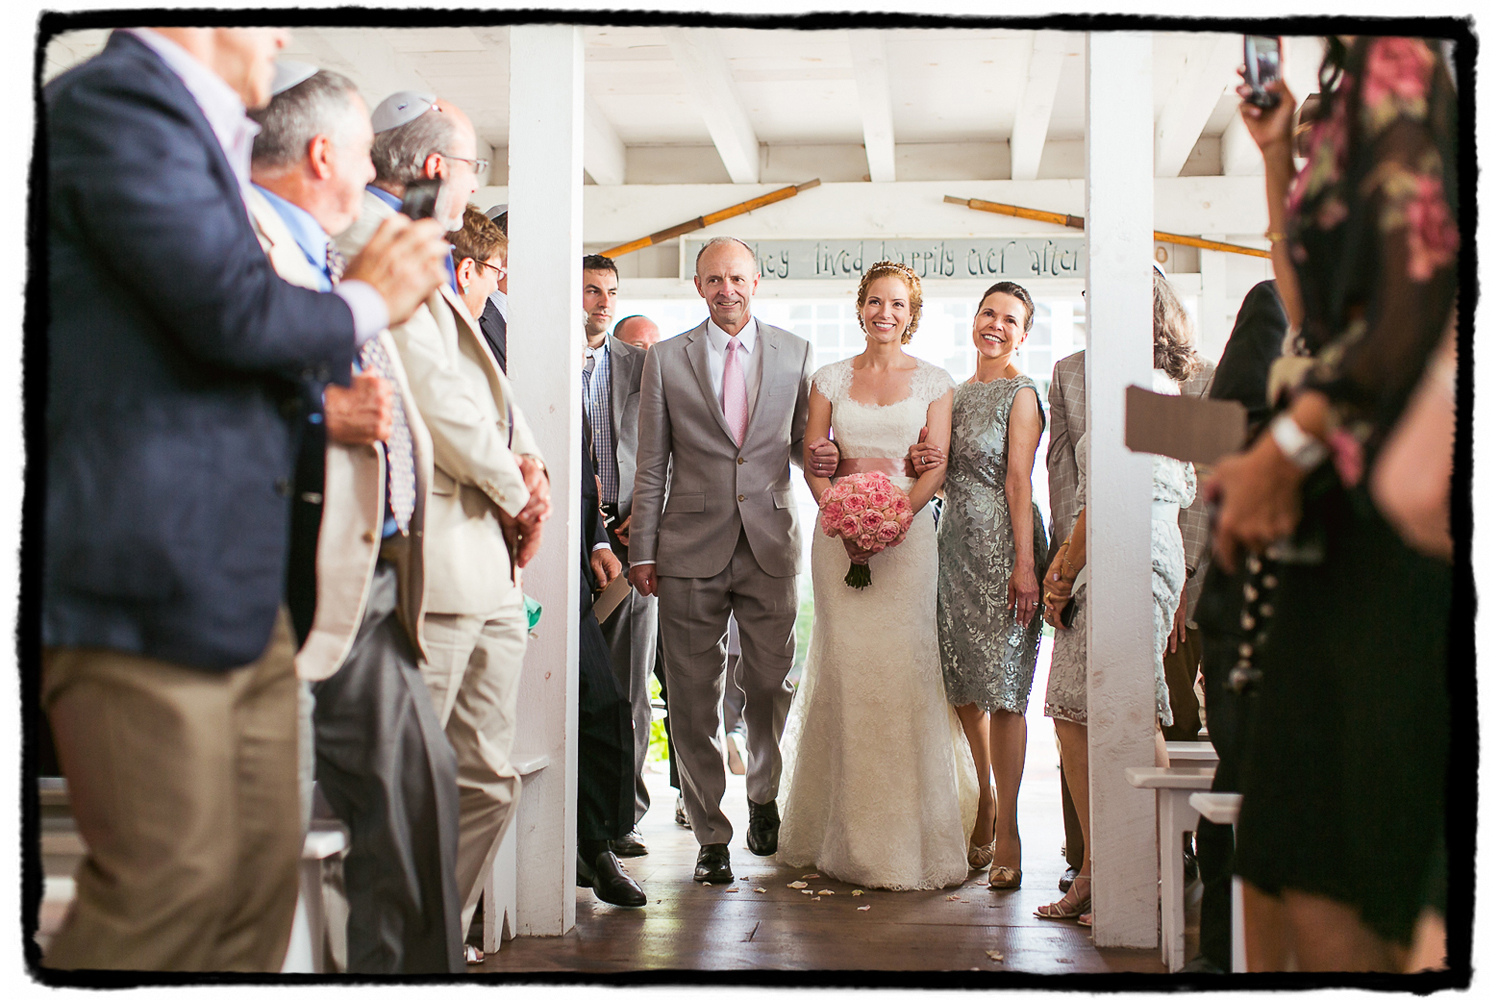 Kelly is walked down the aisle by her parents in the seaside chapel at Bonnet Island Estate.